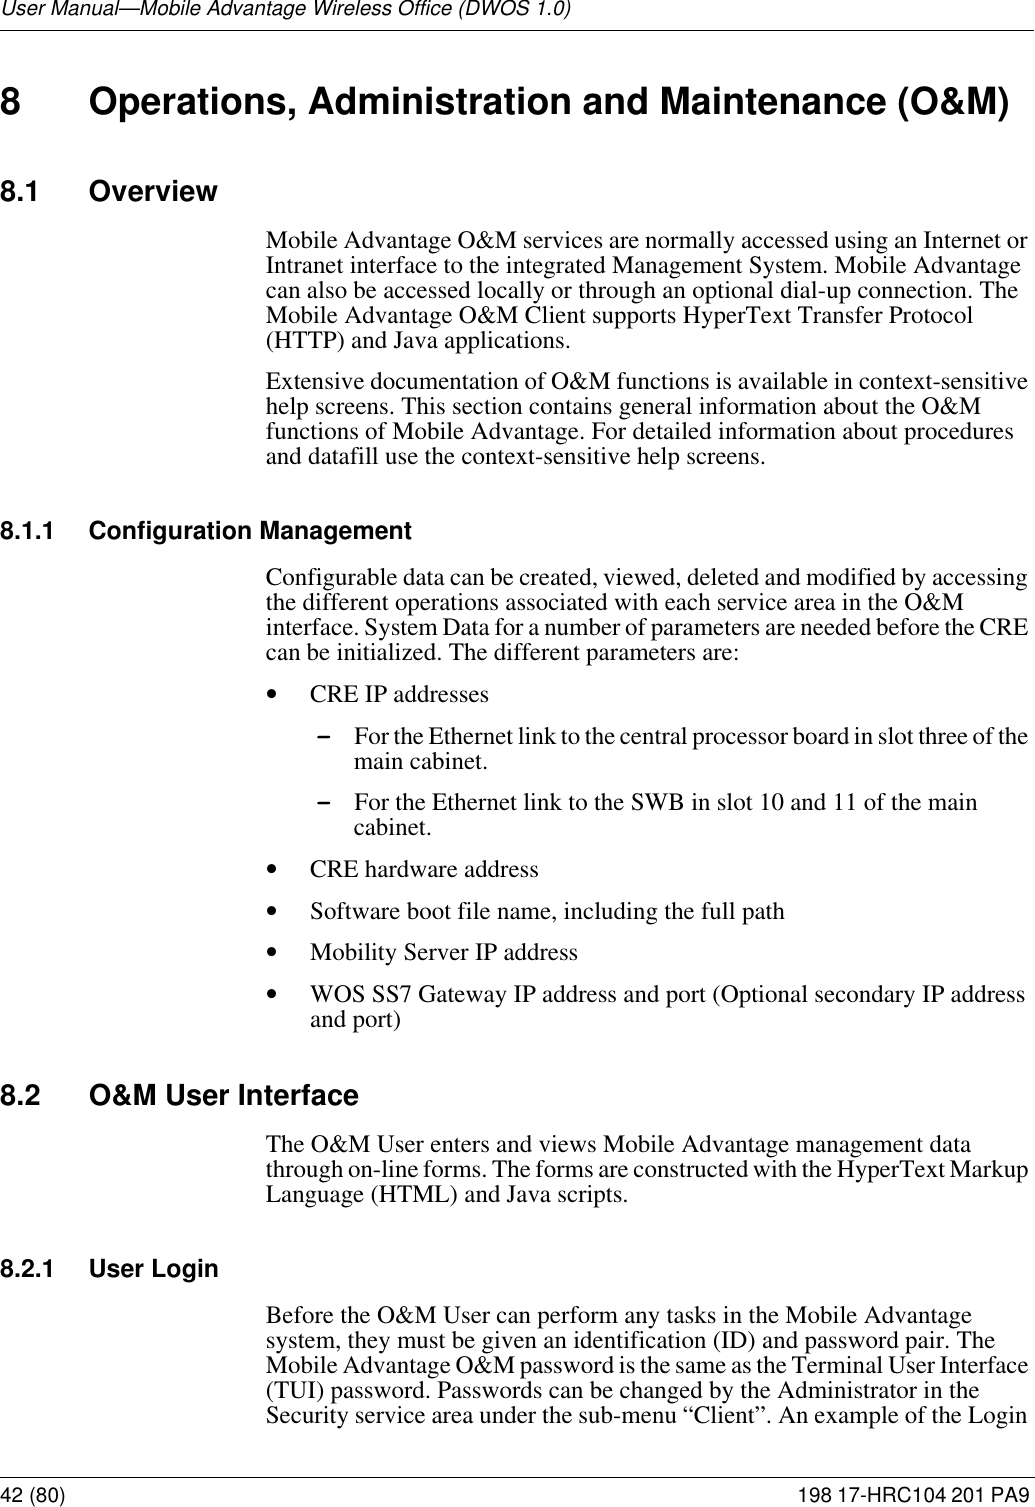 User Manual—Mobile Advantage Wireless Office (DWOS 1.0)42 (80) 198 17-HRC104 201 PA9 8 Operations, Administration and Maintenance (O&amp;M)8.1 OverviewMobile Advantage O&amp;M services are normally accessed using an Internet or Intranet interface to the integrated Management System. Mobile Advantage can also be accessed locally or through an optional dial-up connection. The Mobile Advantage O&amp;M Client supports HyperText Transfer Protocol (HTTP) and Java applications. Extensive documentation of O&amp;M functions is available in context-sensitive help screens. This section contains general information about the O&amp;M functions of Mobile Advantage. For detailed information about procedures and datafill use the context-sensitive help screens. 8.1.1 Configuration ManagementConfigurable data can be created, viewed, deleted and modified by accessing the different operations associated with each service area in the O&amp;M interface. System Data for a number of parameters are needed before the CRE can be initialized. The different parameters are:•CRE IP addresses-For the Ethernet link to the central processor board in slot three of the main cabinet.-For the Ethernet link to the SWB in slot 10 and 11 of the main cabinet.•CRE hardware address•Software boot file name, including the full path•Mobility Server IP address•WOS SS7 Gateway IP address and port (Optional secondary IP address and port)8.2 O&amp;M User InterfaceThe O&amp;M User enters and views Mobile Advantage management data through on-line forms. The forms are constructed with the HyperText Markup Language (HTML) and Java scripts. 8.2.1 User LoginBefore the O&amp;M User can perform any tasks in the Mobile Advantage system, they must be given an identification (ID) and password pair. The Mobile Advantage O&amp;M password is the same as the Terminal User Interface (TUI) password. Passwords can be changed by the Administrator in the Security service area under the sub-menu “Client”. An example of the Login 